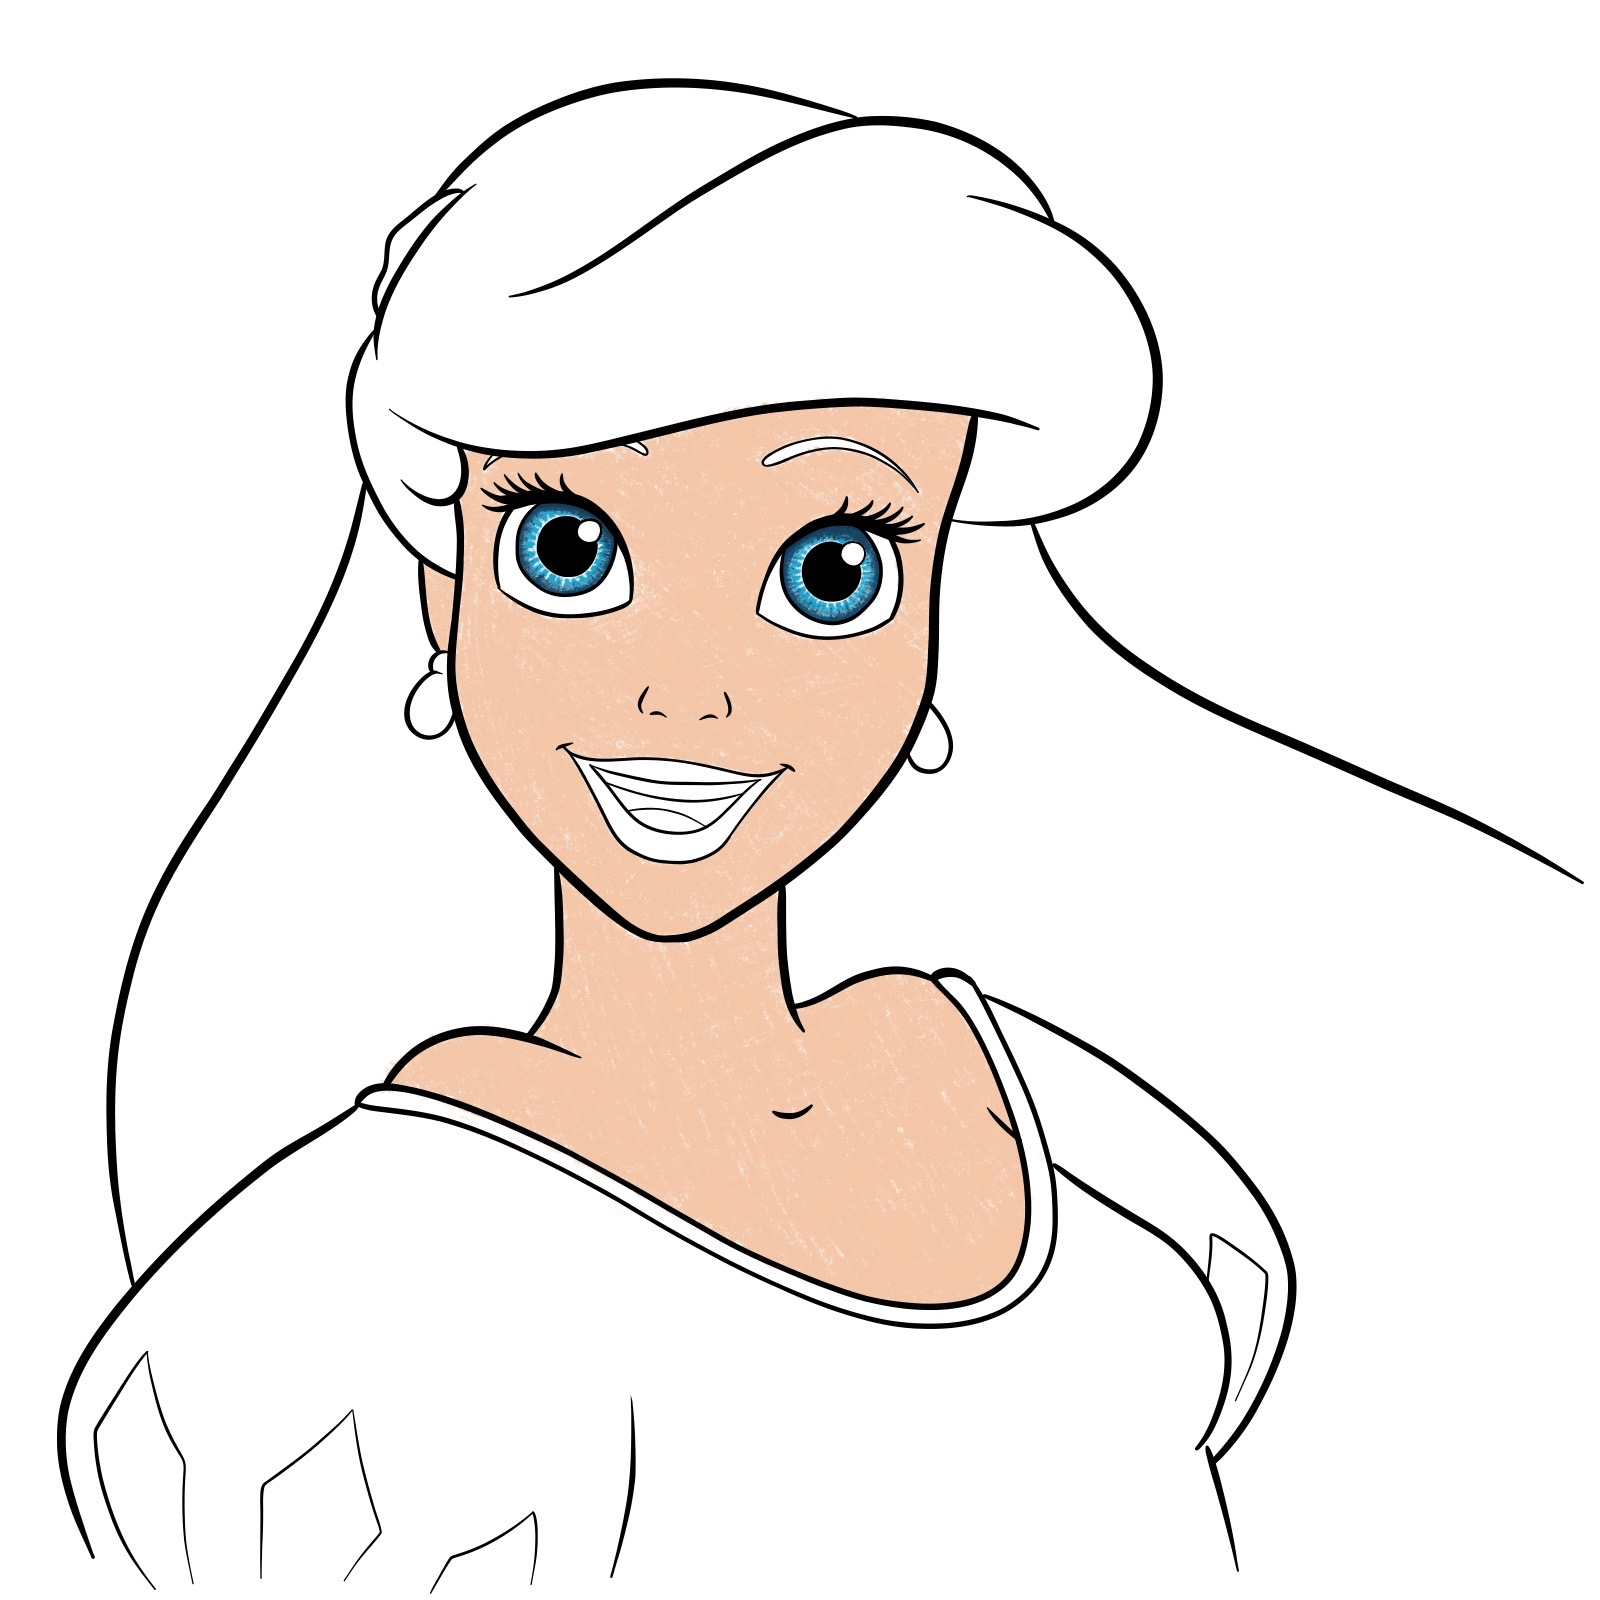 How to draw Ariel's face - The Little Mermaid - step 32